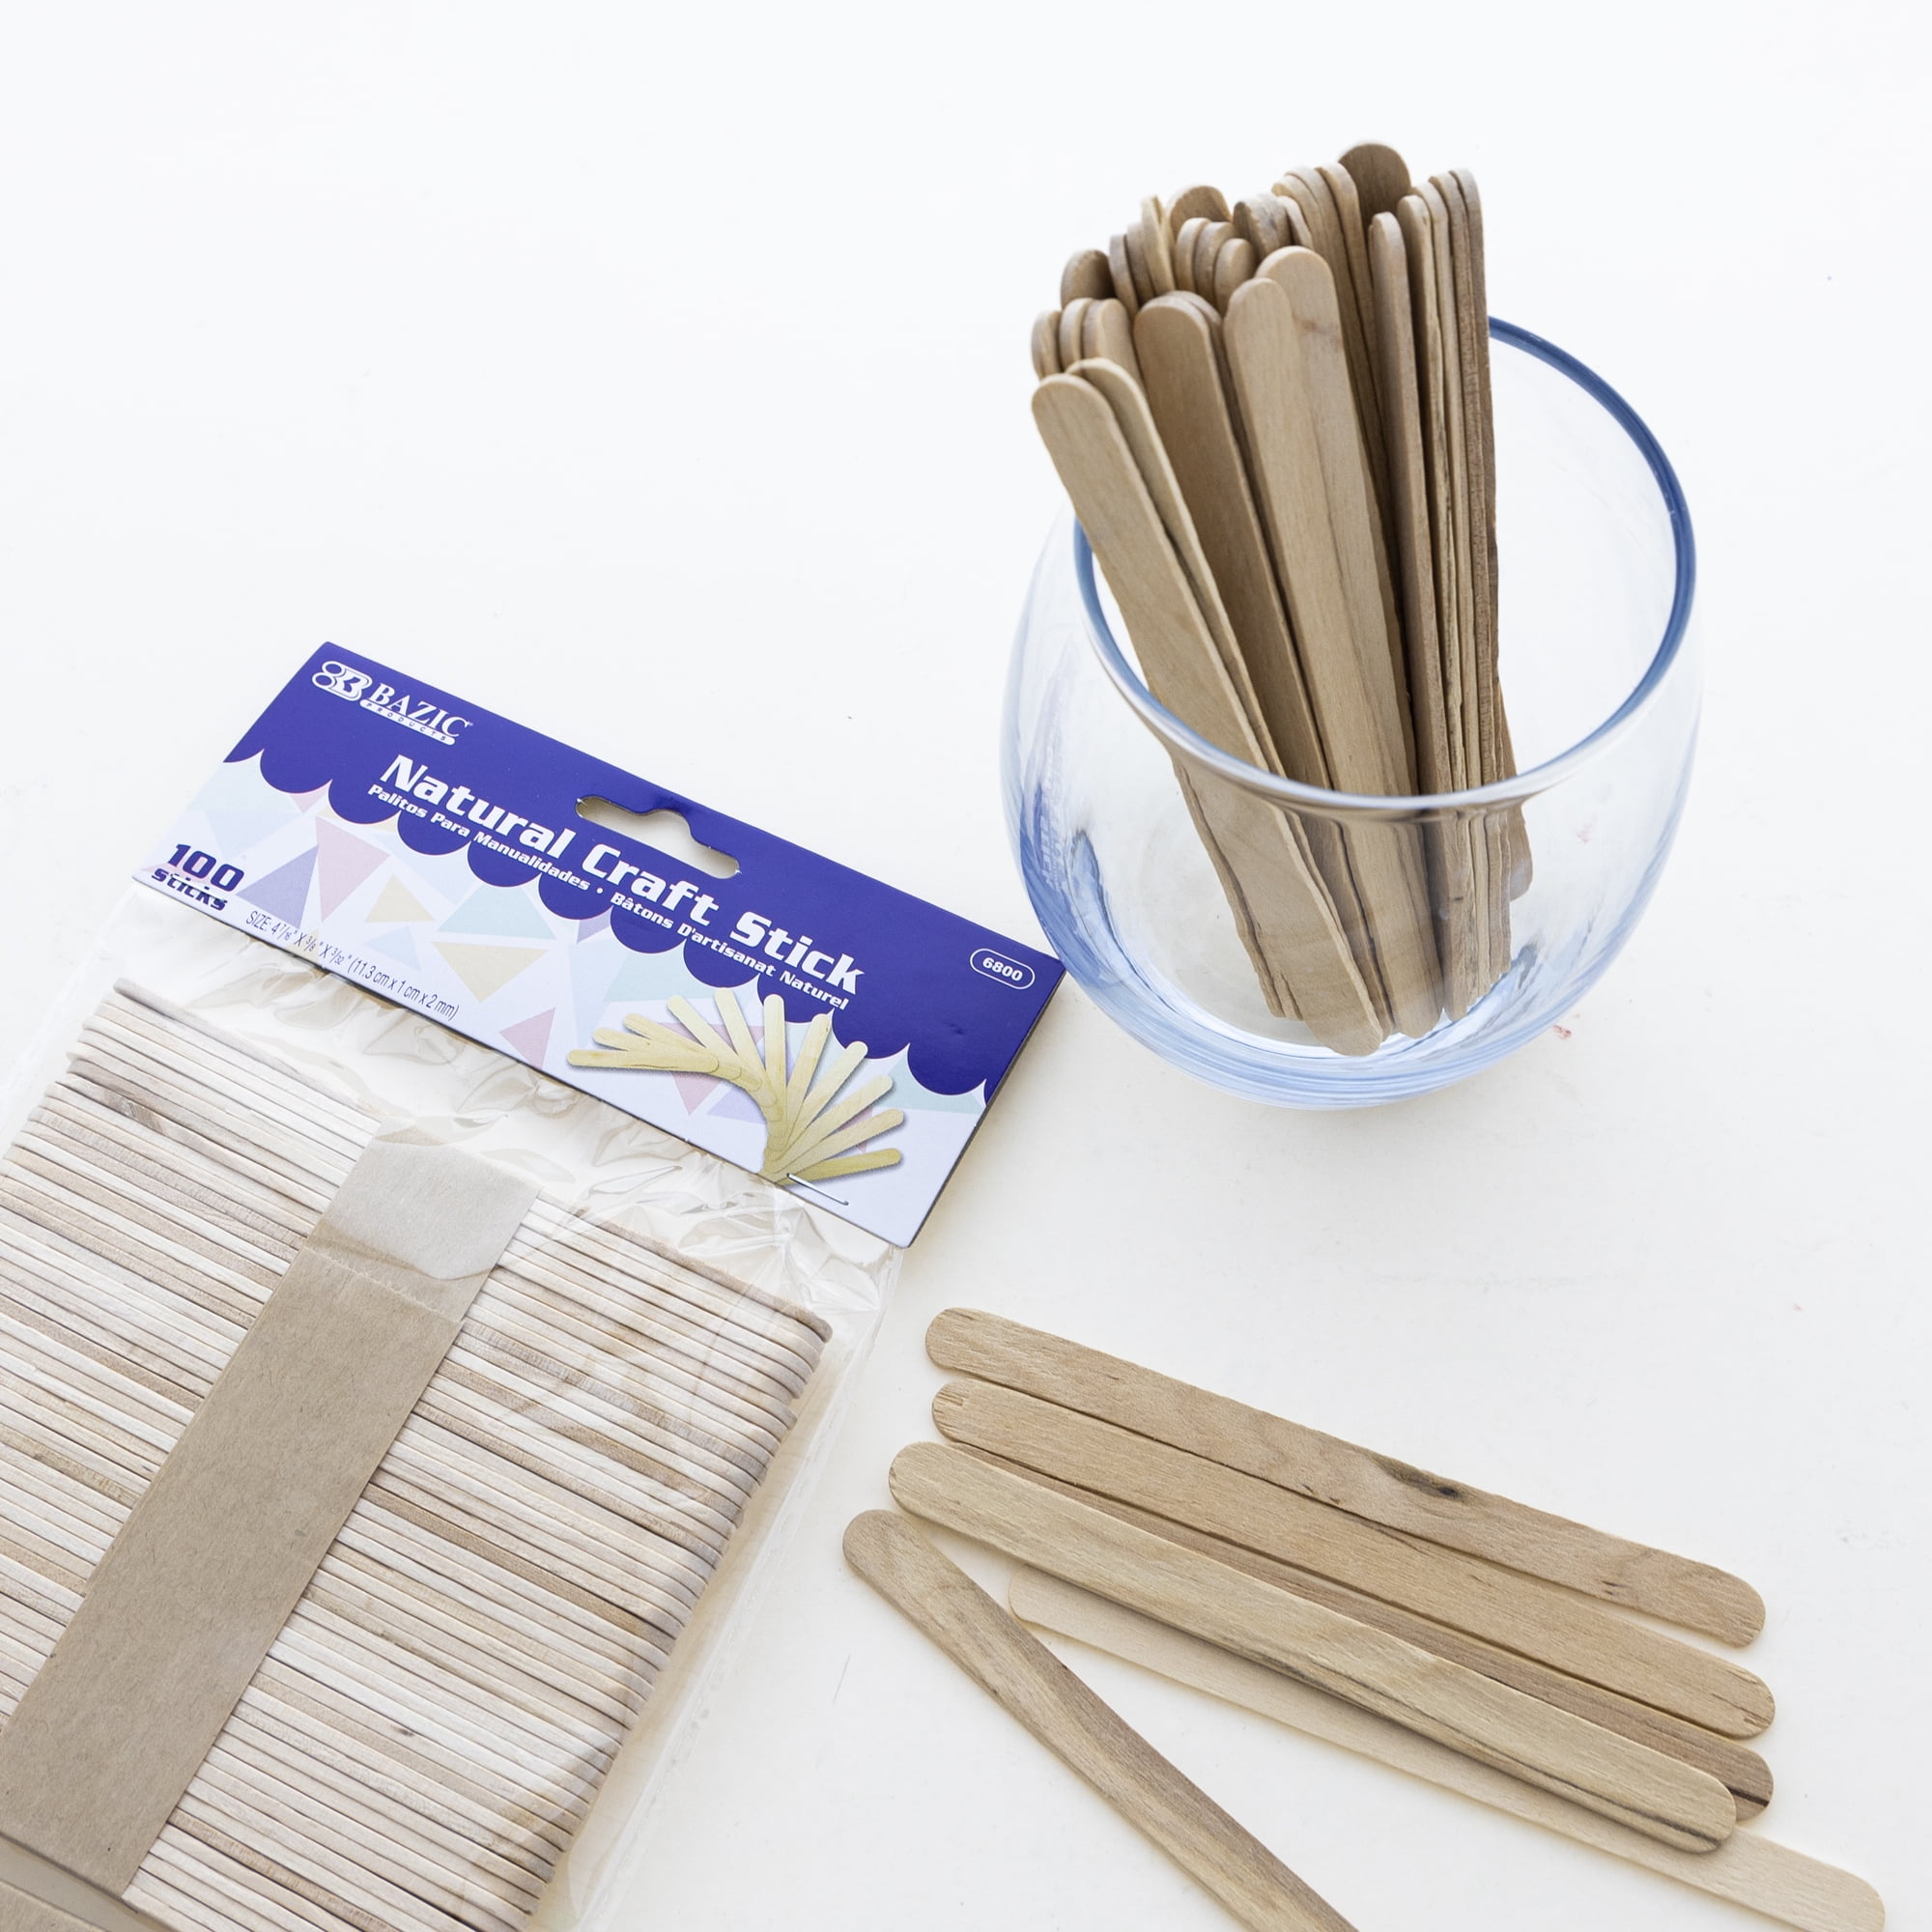  Multicraft Imports Extra Jumbo Craft Sticks-Natural 7.9 inch x  0.8 inch 25/Pk : Arts, Crafts & Sewing